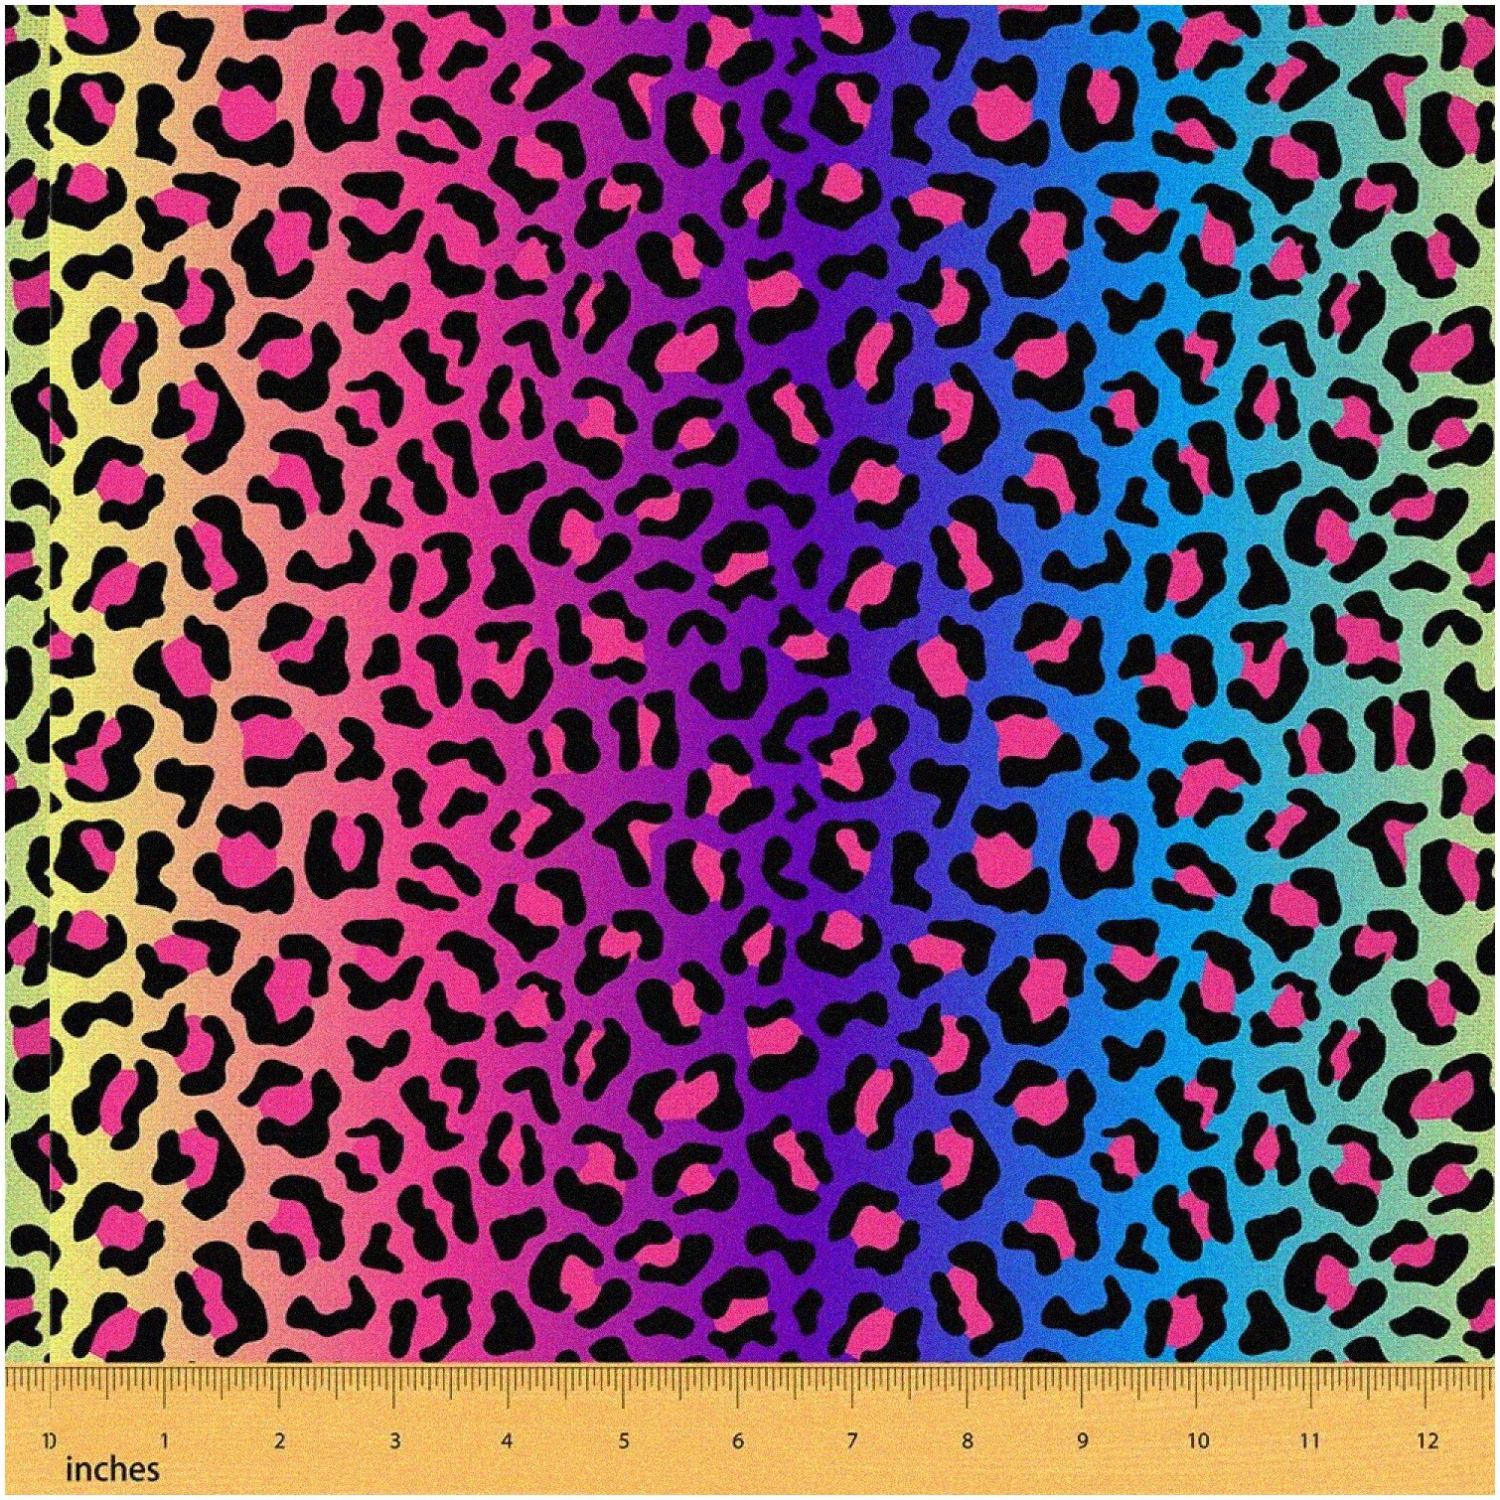 Wild Rainbow Safari Fabric: Colorful Cheetah, Leopard, and Geometric Watercolor Print for Upholstery, Indoor/Outdoor Decor - Sold by the Yard